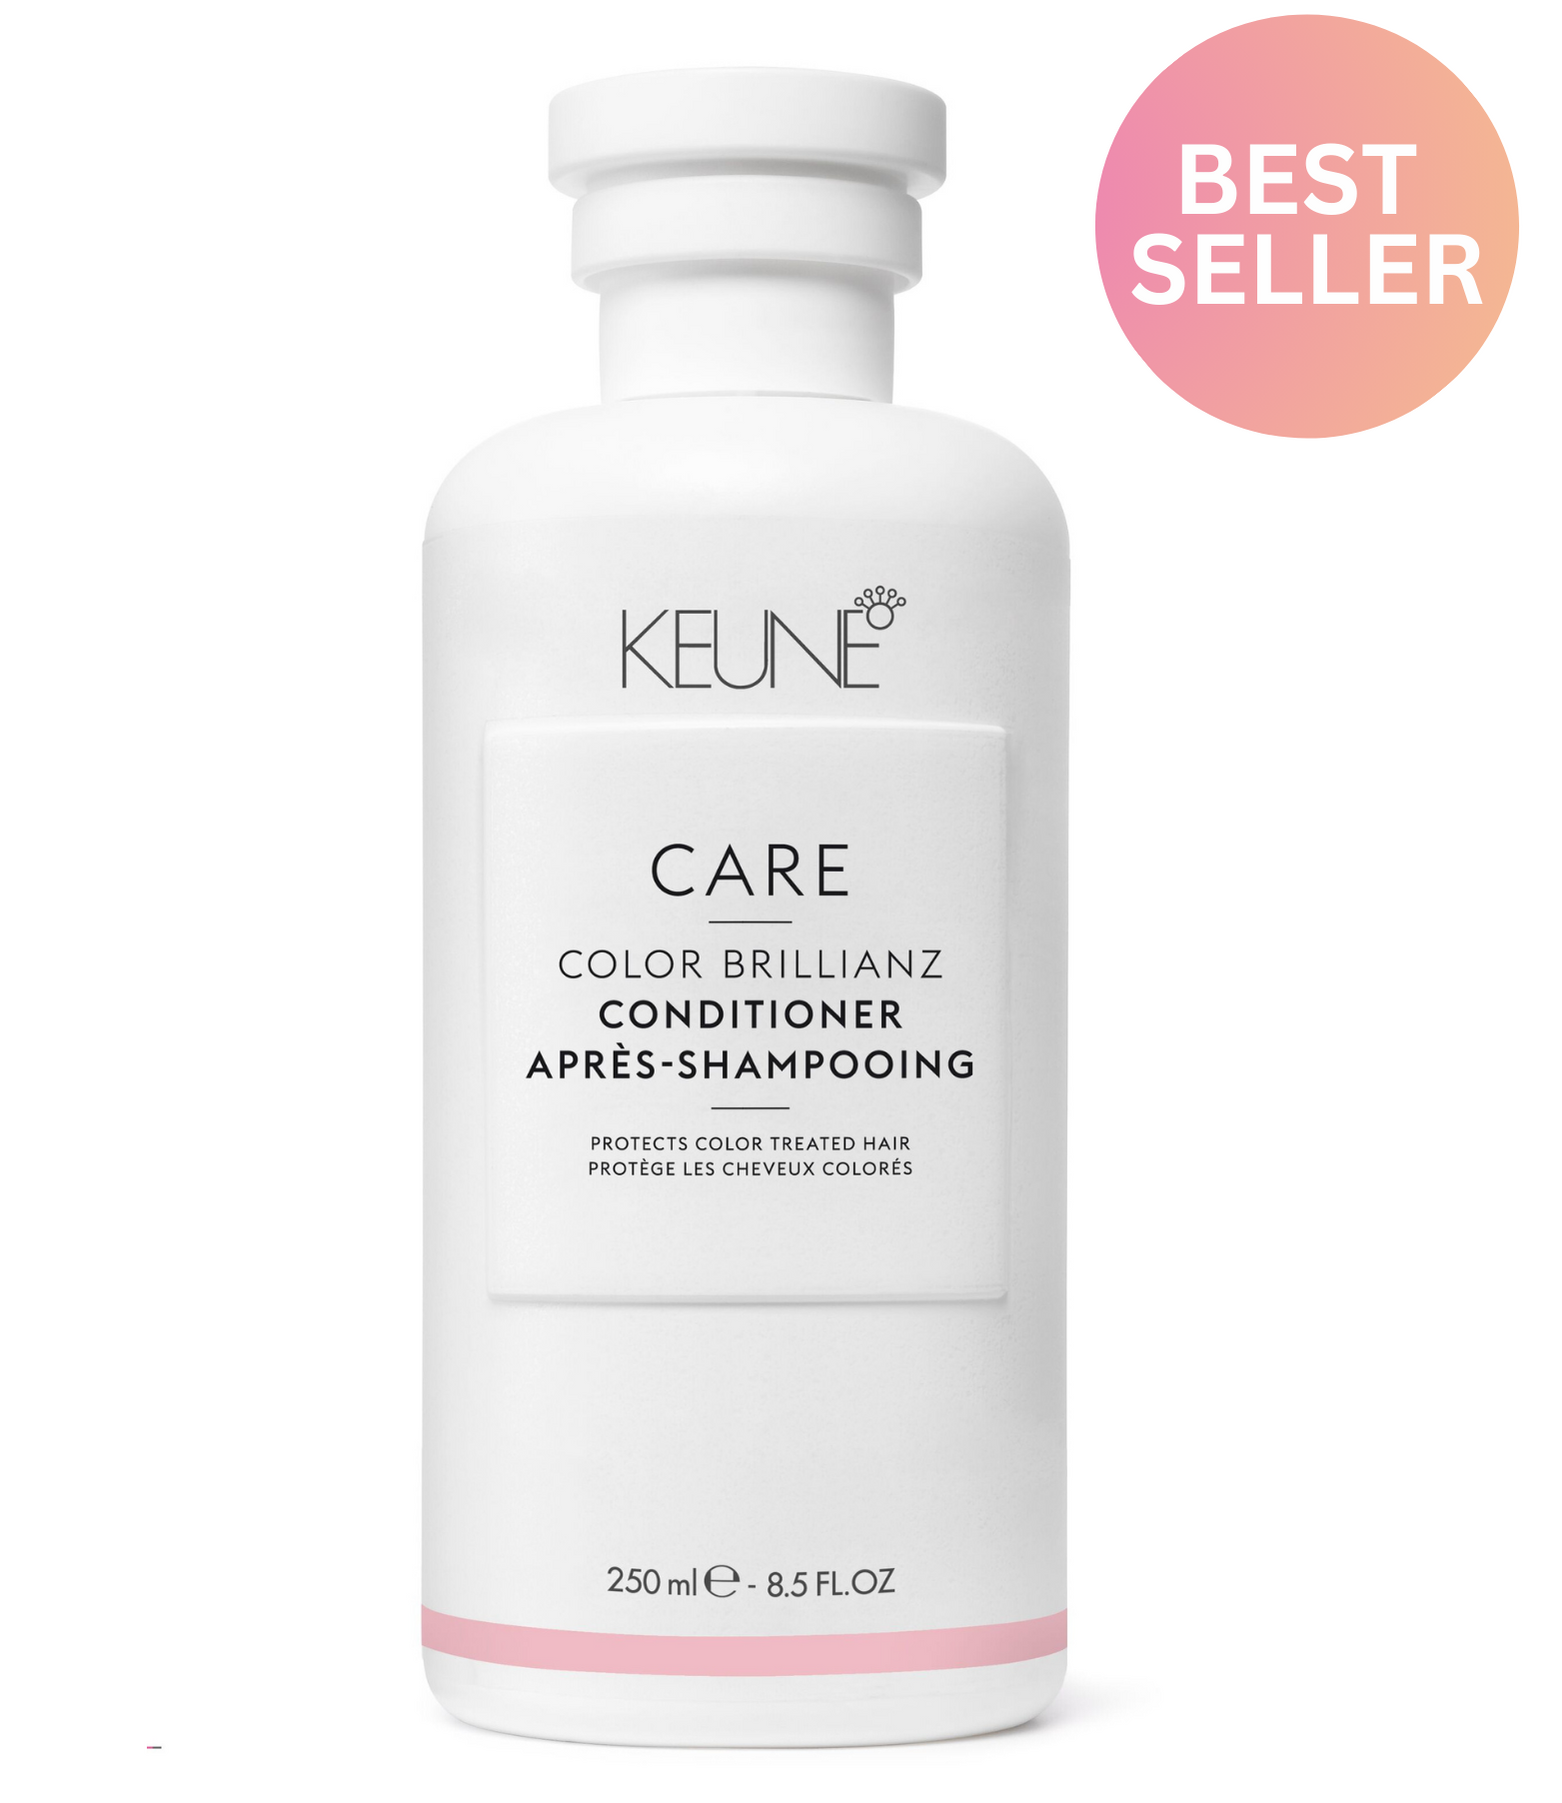 Take care of your hair color with CARE COLOR BRILLIANZ CONDITIONER on keune.ch. Long-lasting brilliance, strength, and smoothness for your dyed hair. On keune.ch.